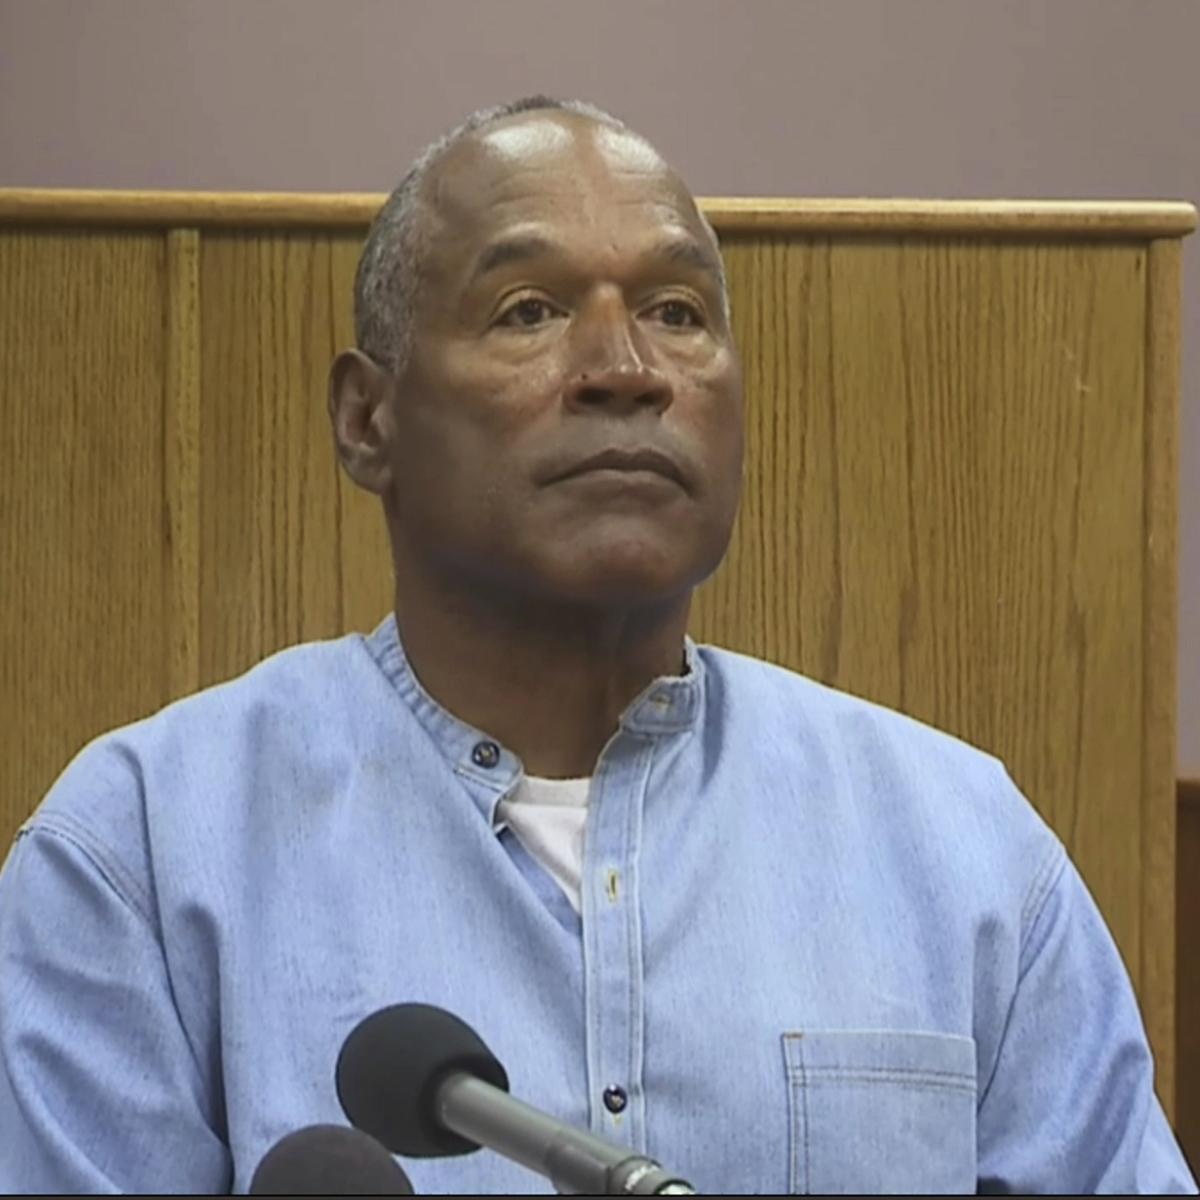 Oj Simpson Remains Invitee To Pro Football Hall Of Fame Upon Prison Release Bleacher Report Latest News Videos And Highlights